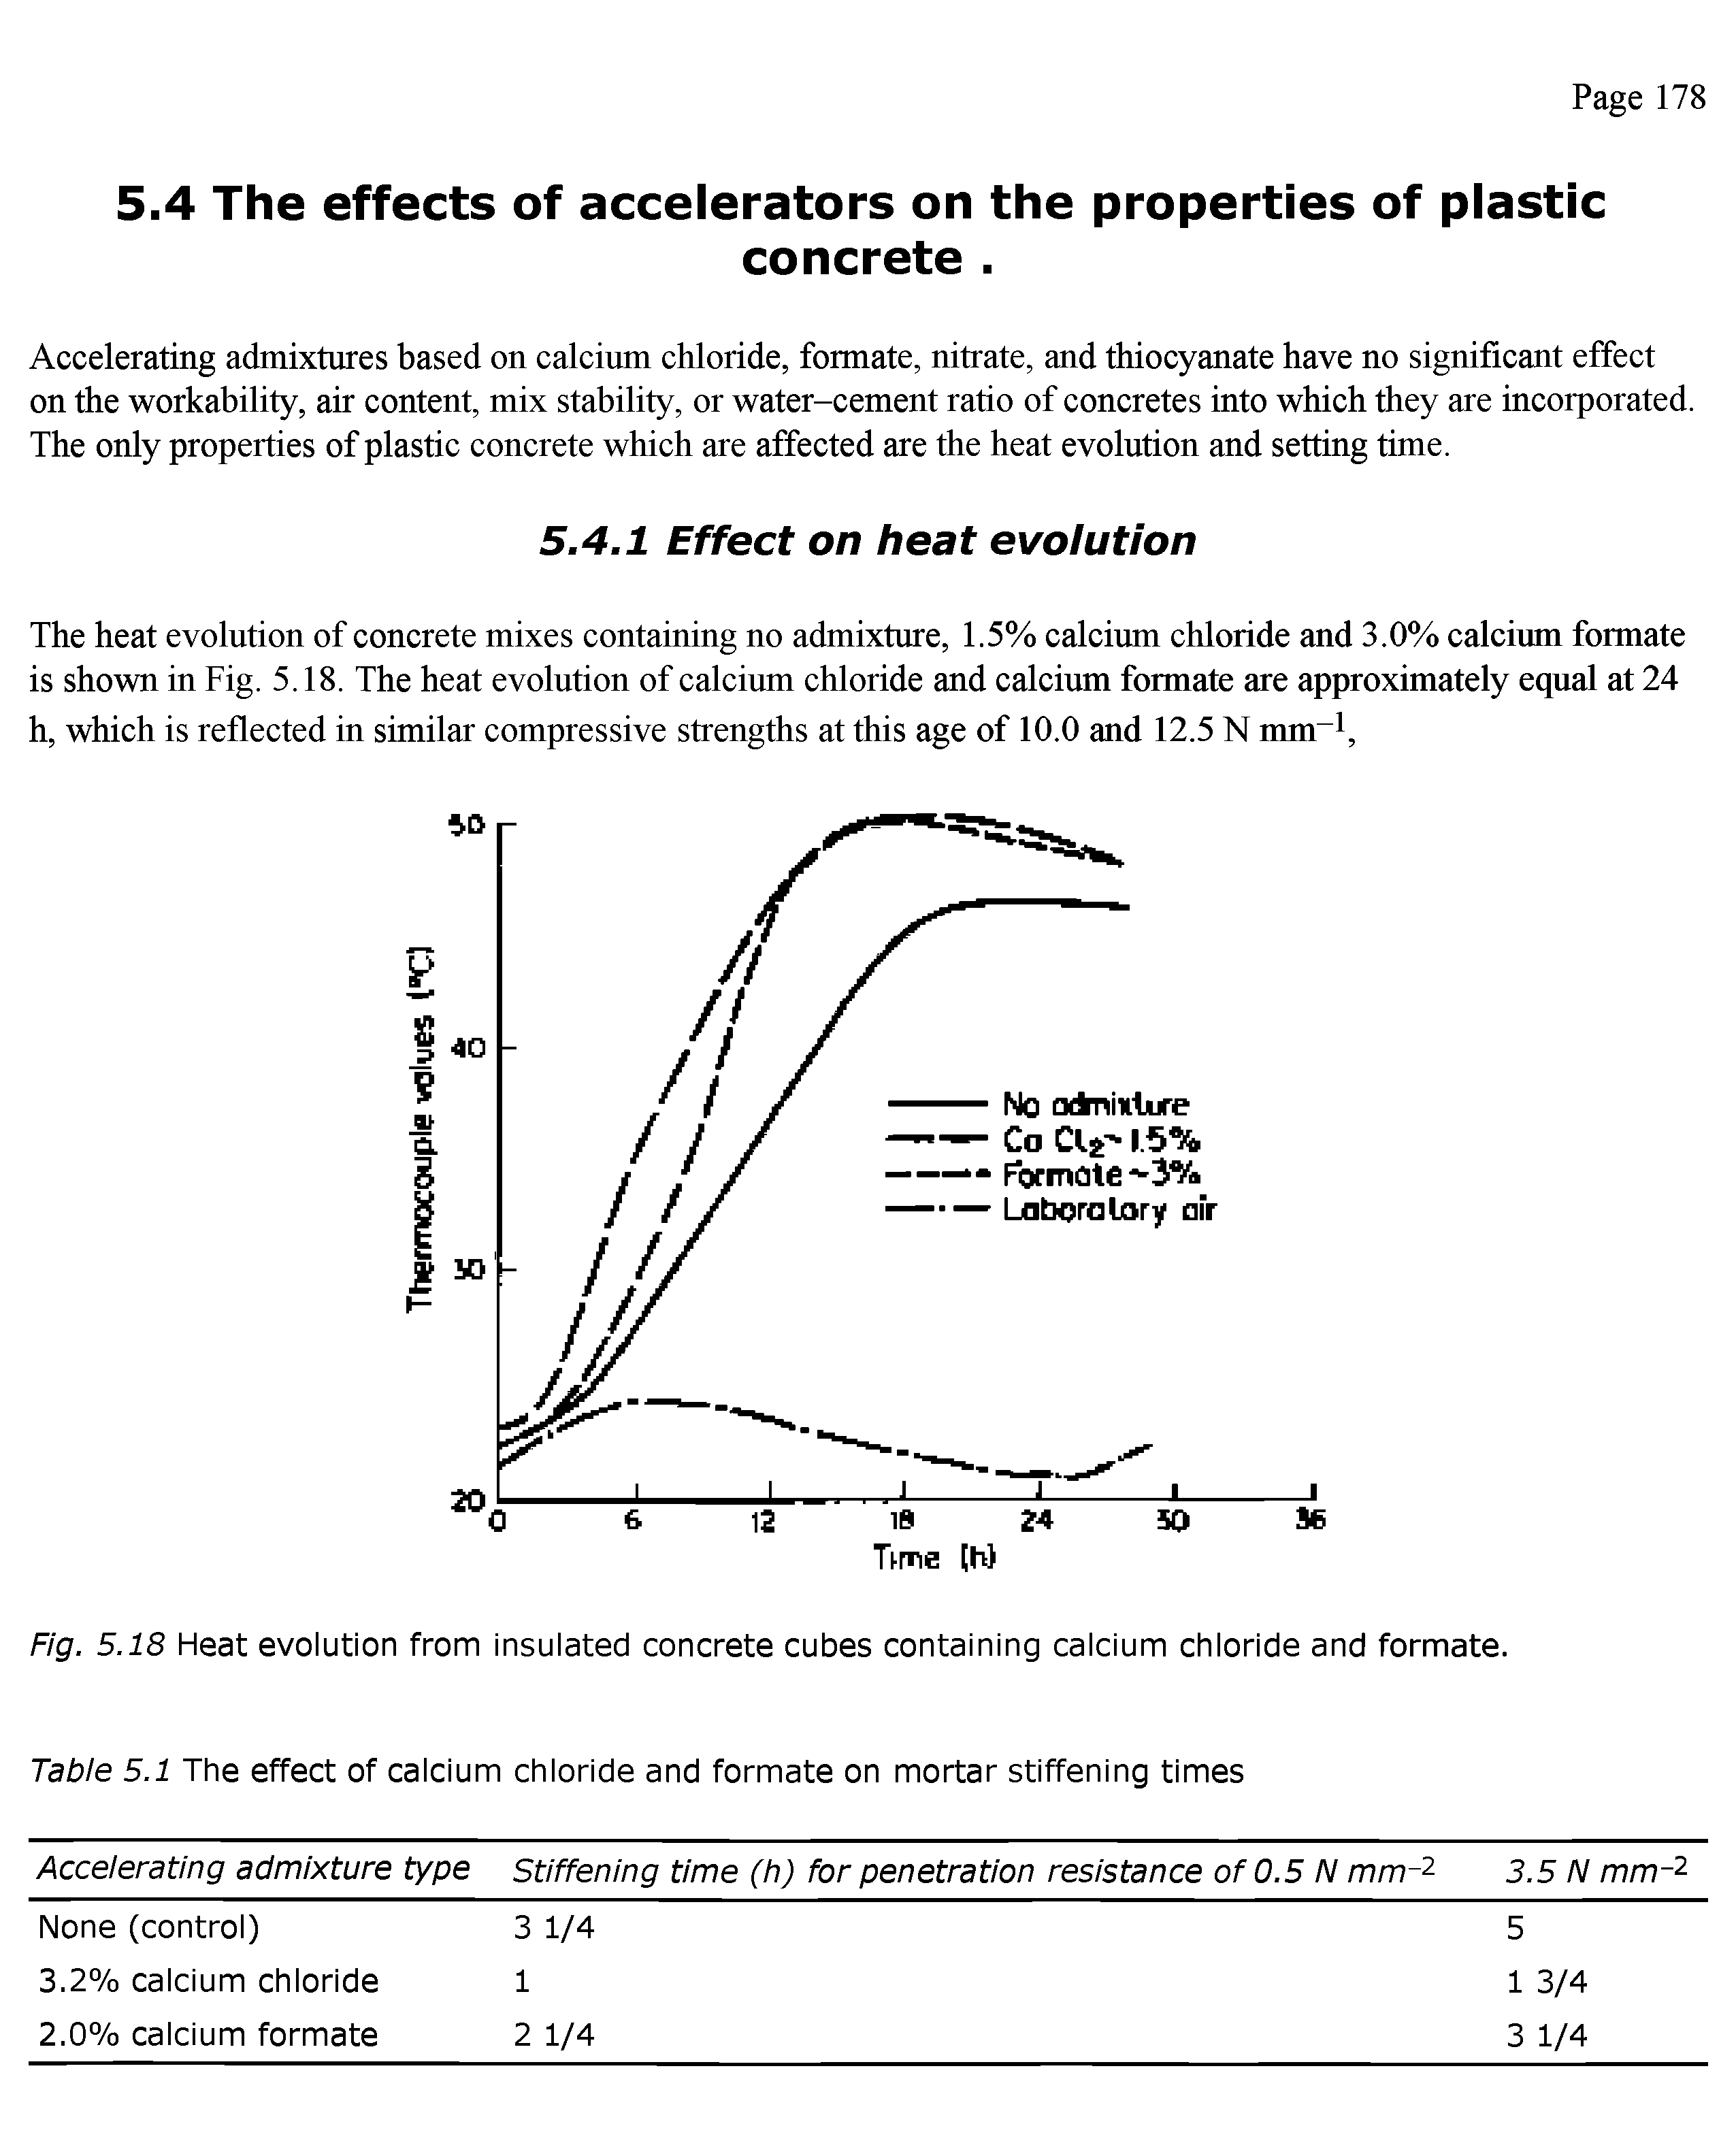 Fig. 5.18 Heat evolution from insulated concrete cubes containing calcium chloride and formate. Table 5.1 The effect of calcium chloride and formate on mortar stiffening times...